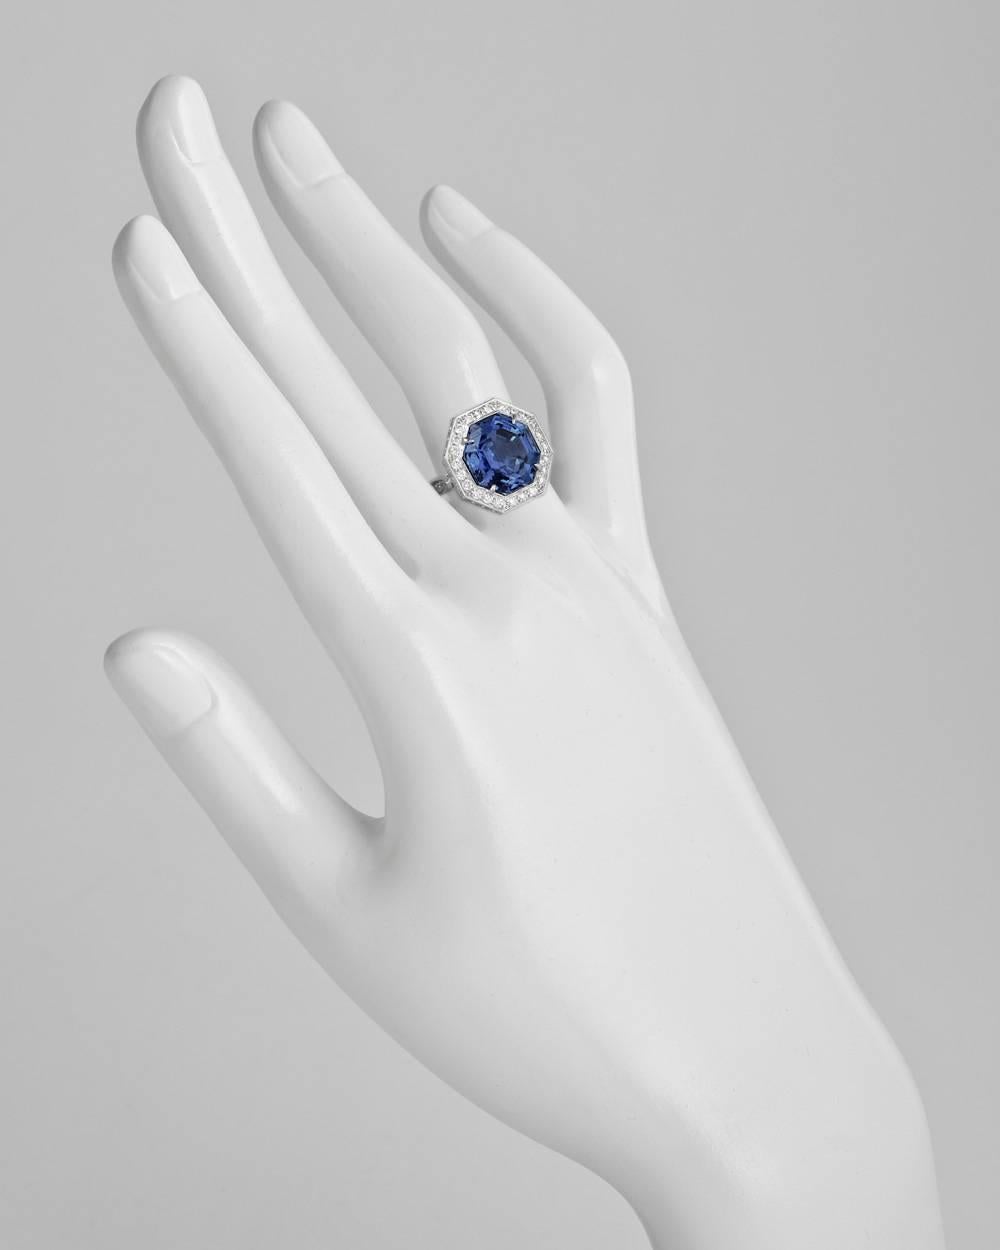 Sapphire cocktail ring, showcasing an octagonal-shaped natural Ceylon sapphire weighing 7.22 carats (certified: no indications of heat treatment), framed by two rows of round-cut diamonds with round-cut diamond-set shoulders, mounted in 18k white